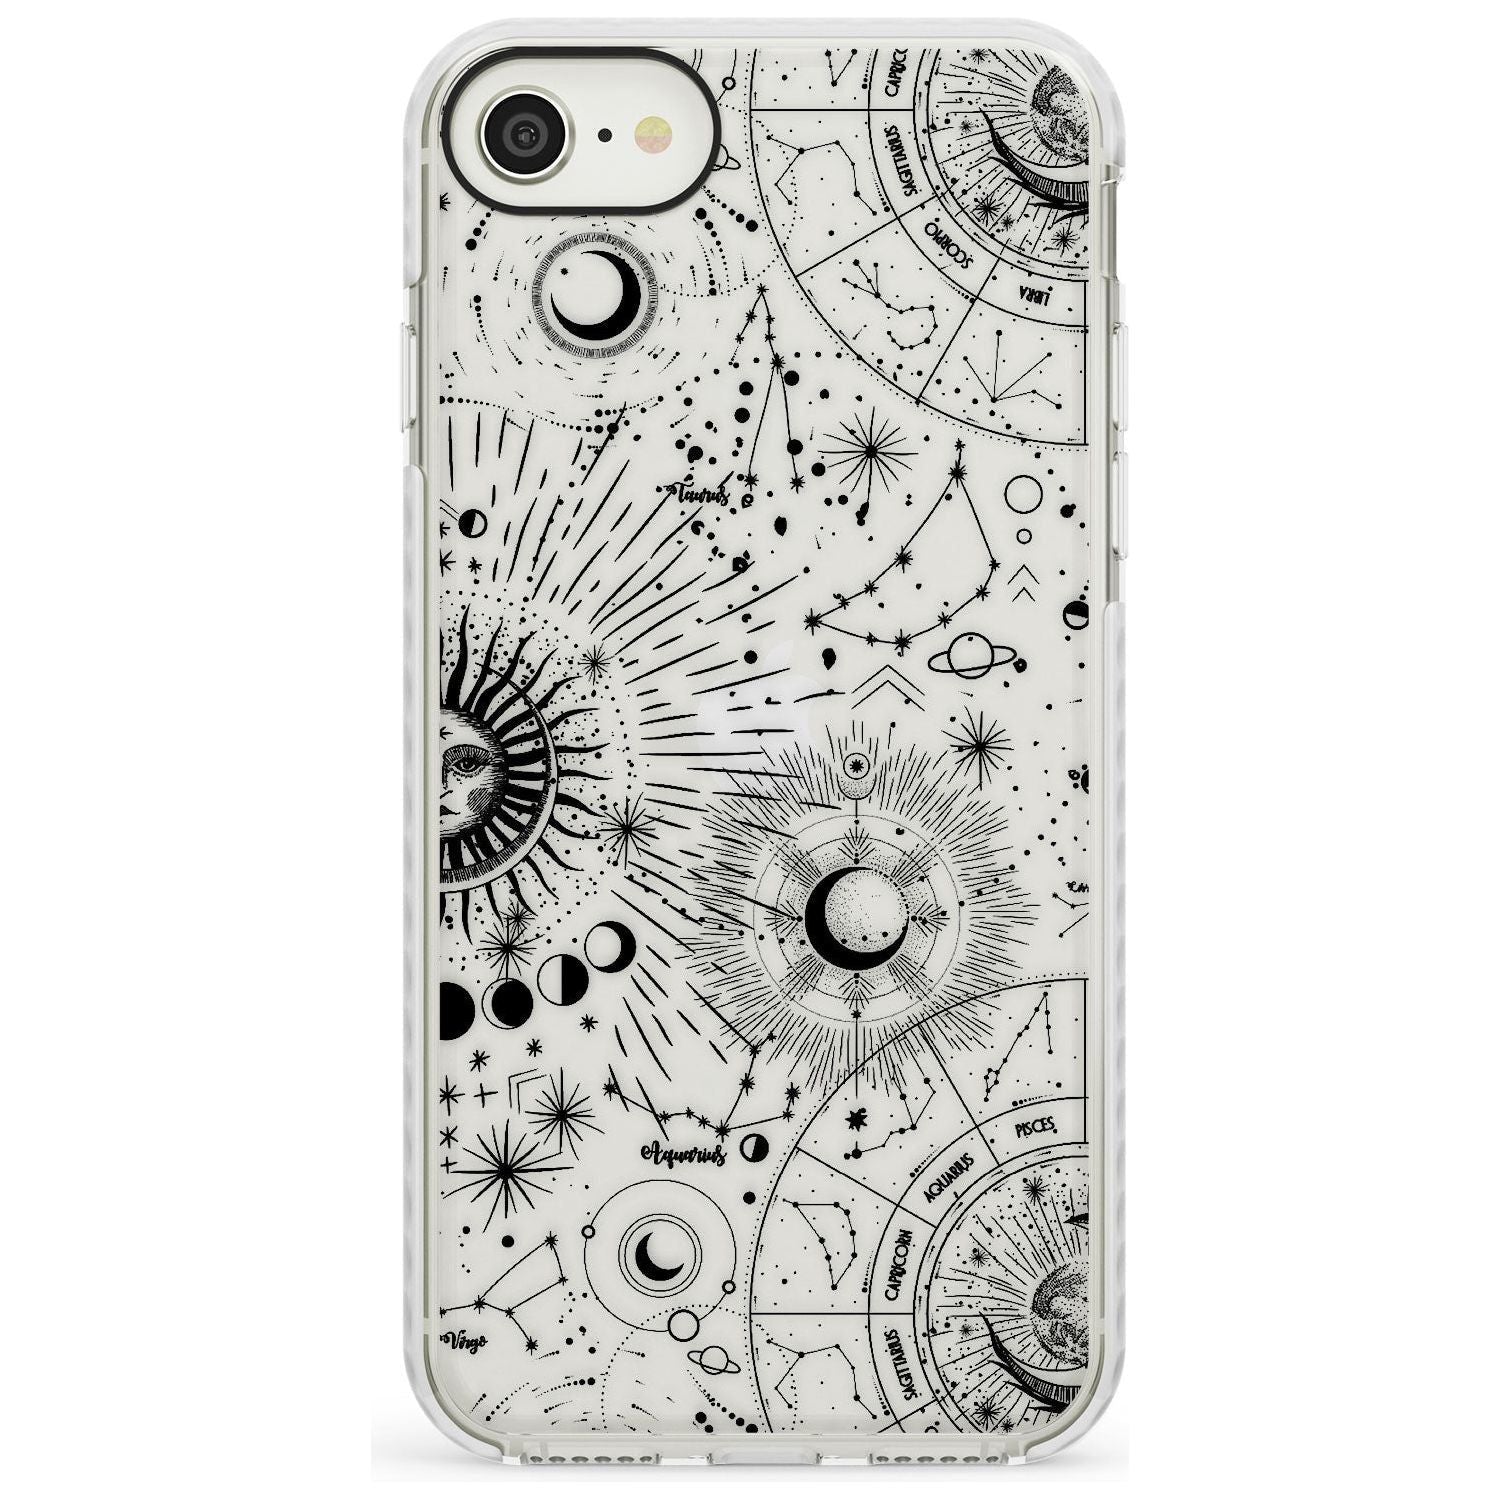 Suns & Constellations Astrological Impact Phone Case for iPhone SE 8 7 Plus